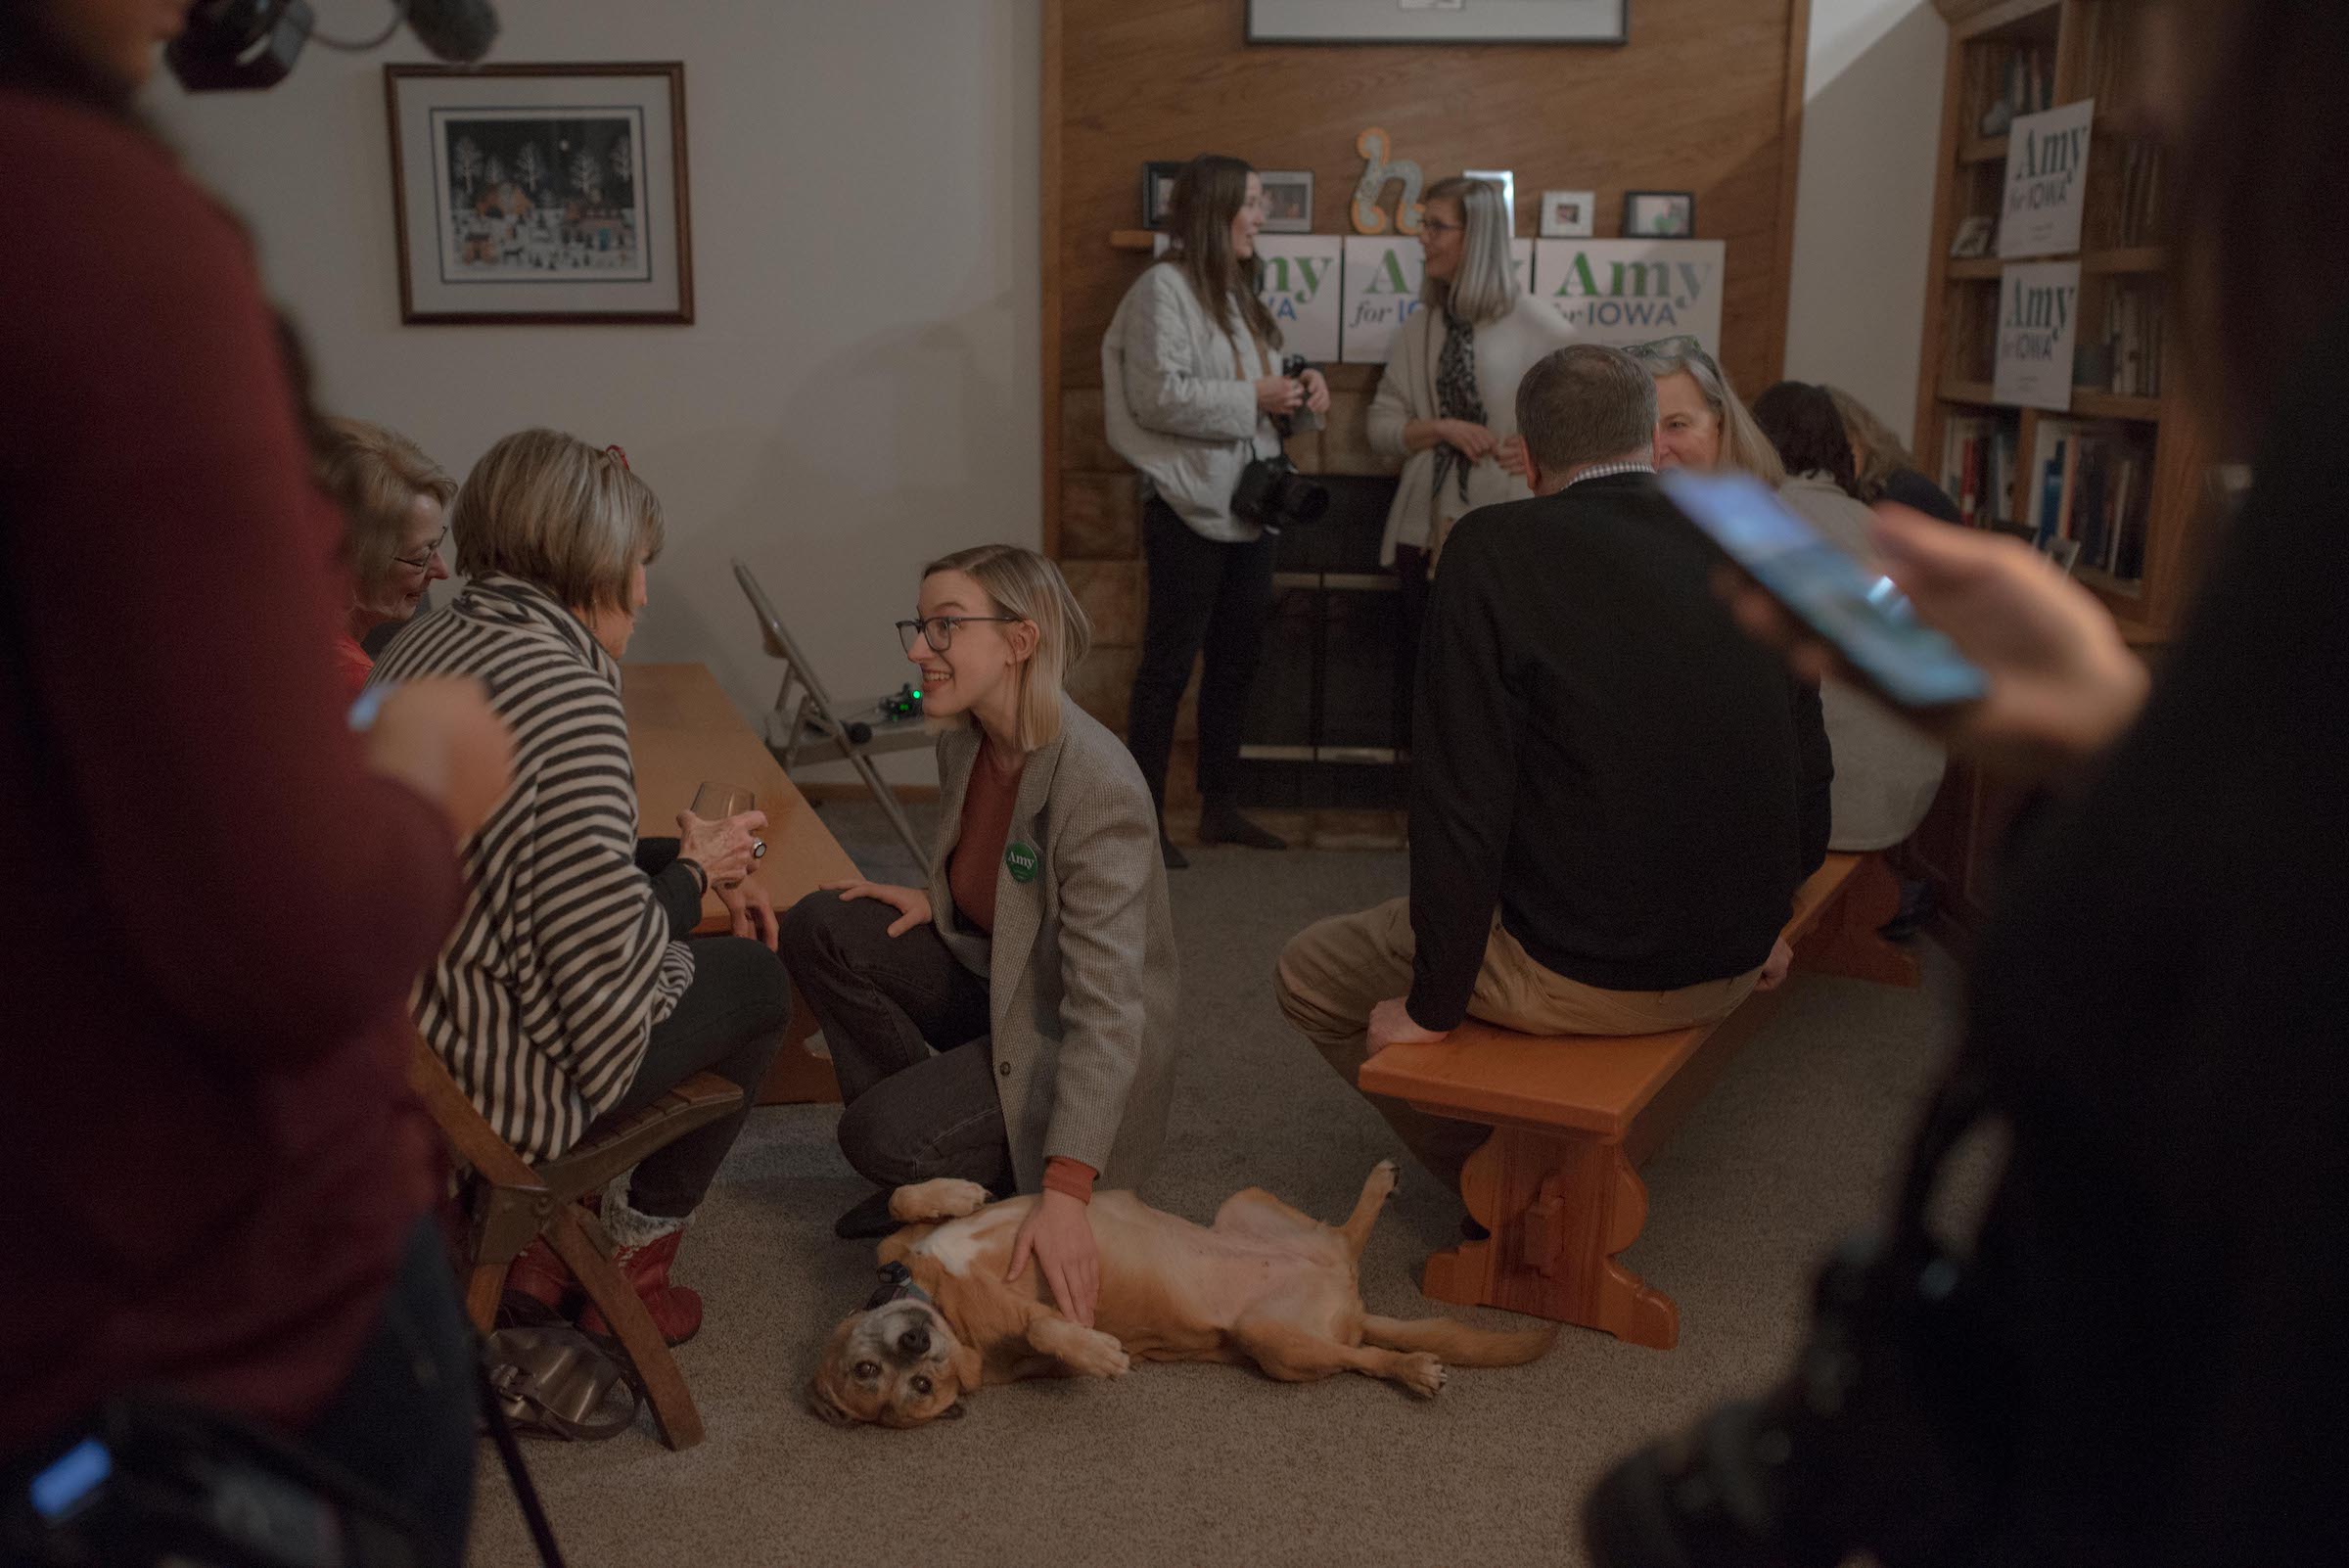 Abigail Bessler pets a dog while speaking with supporters at a Hotdish House Party. (September Dawn Bottoms for TIME)